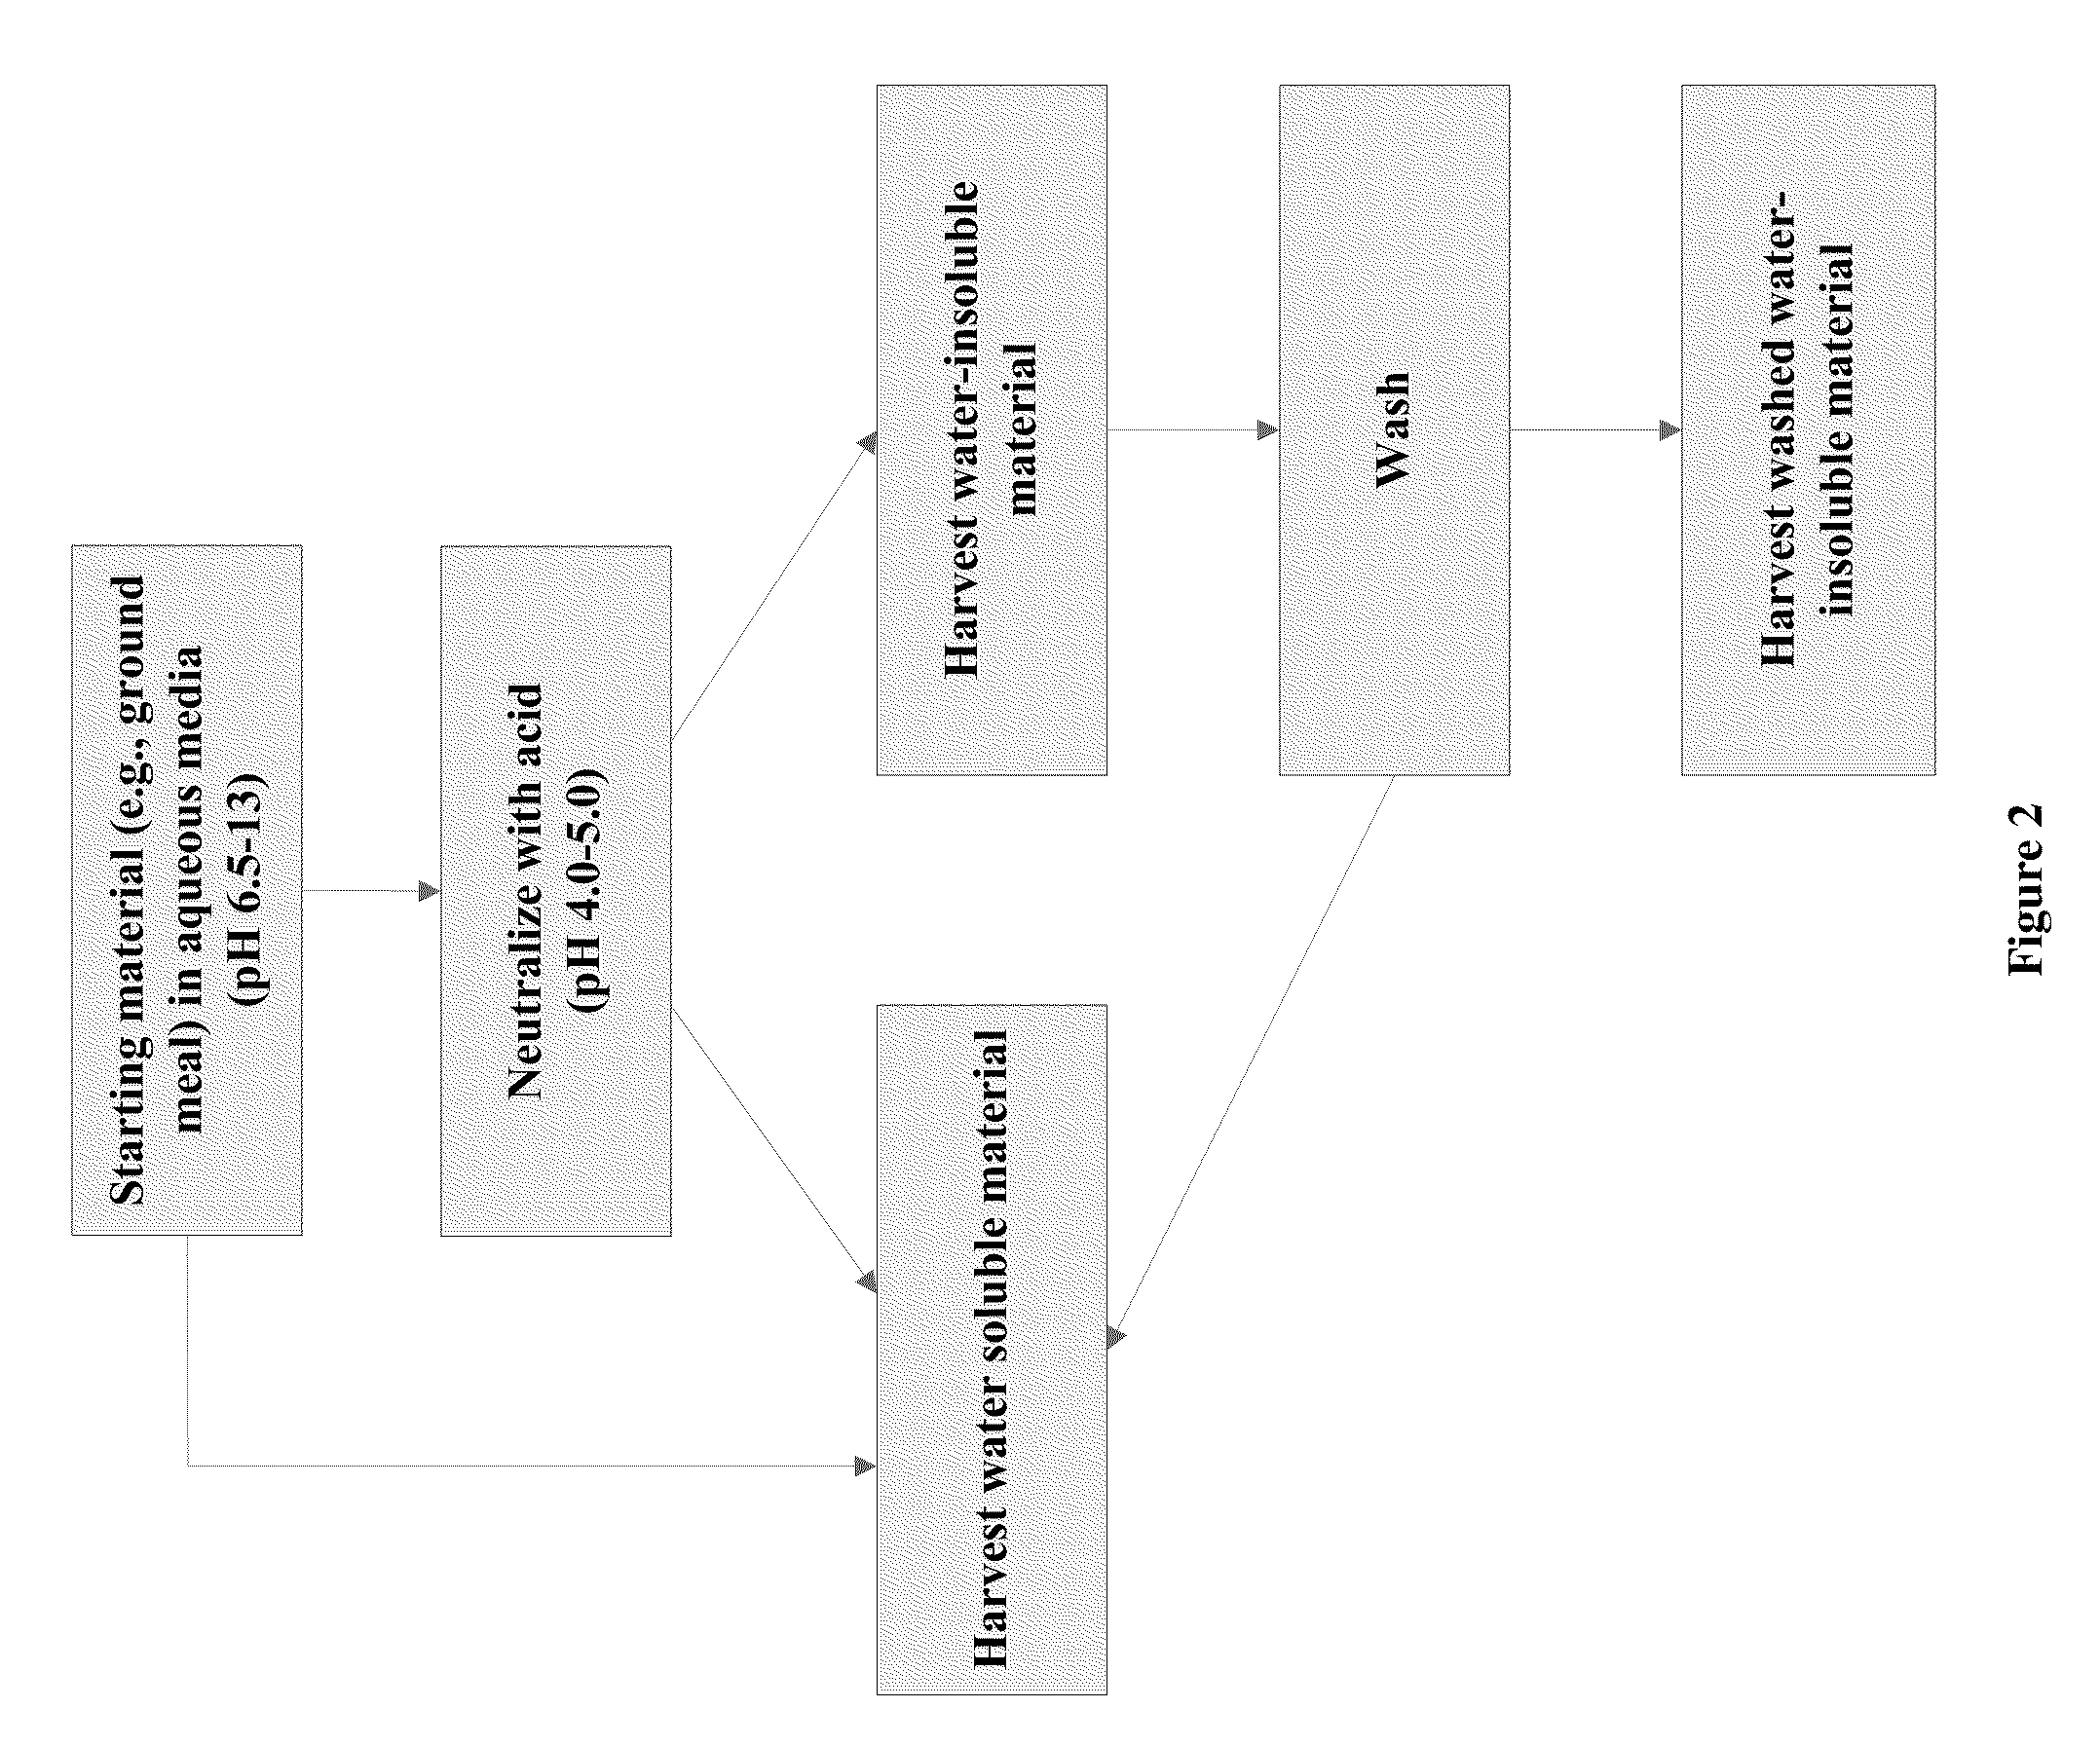 Protein-Containing Emulsions and Adhesives, and Manufacture and Use Thereof